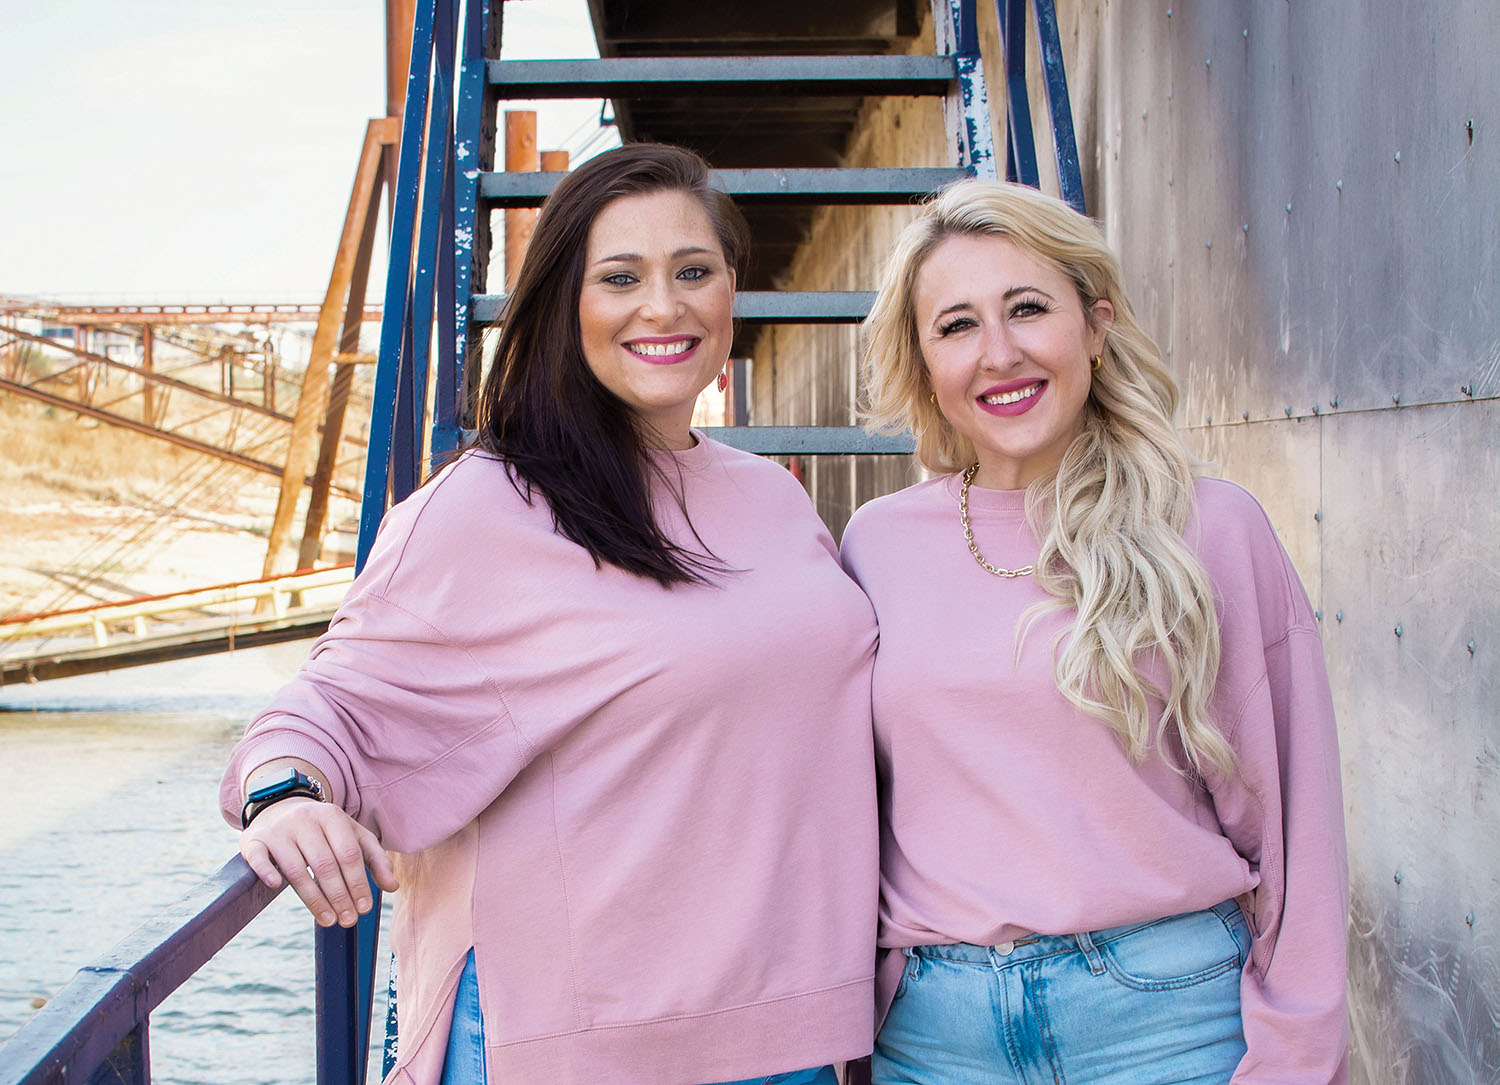 Breanna Clayton (left) and Jessica Branham are the chief operating officer and CEO, respectively, of Royal Barge Fleeting, which will handle dry-cargo fleeting, cleaning, repairs and drydock services in the Memphis, Tenn., area. The business is slated to open January 15. (Photo courtesy of Royal Barge Fleeting)